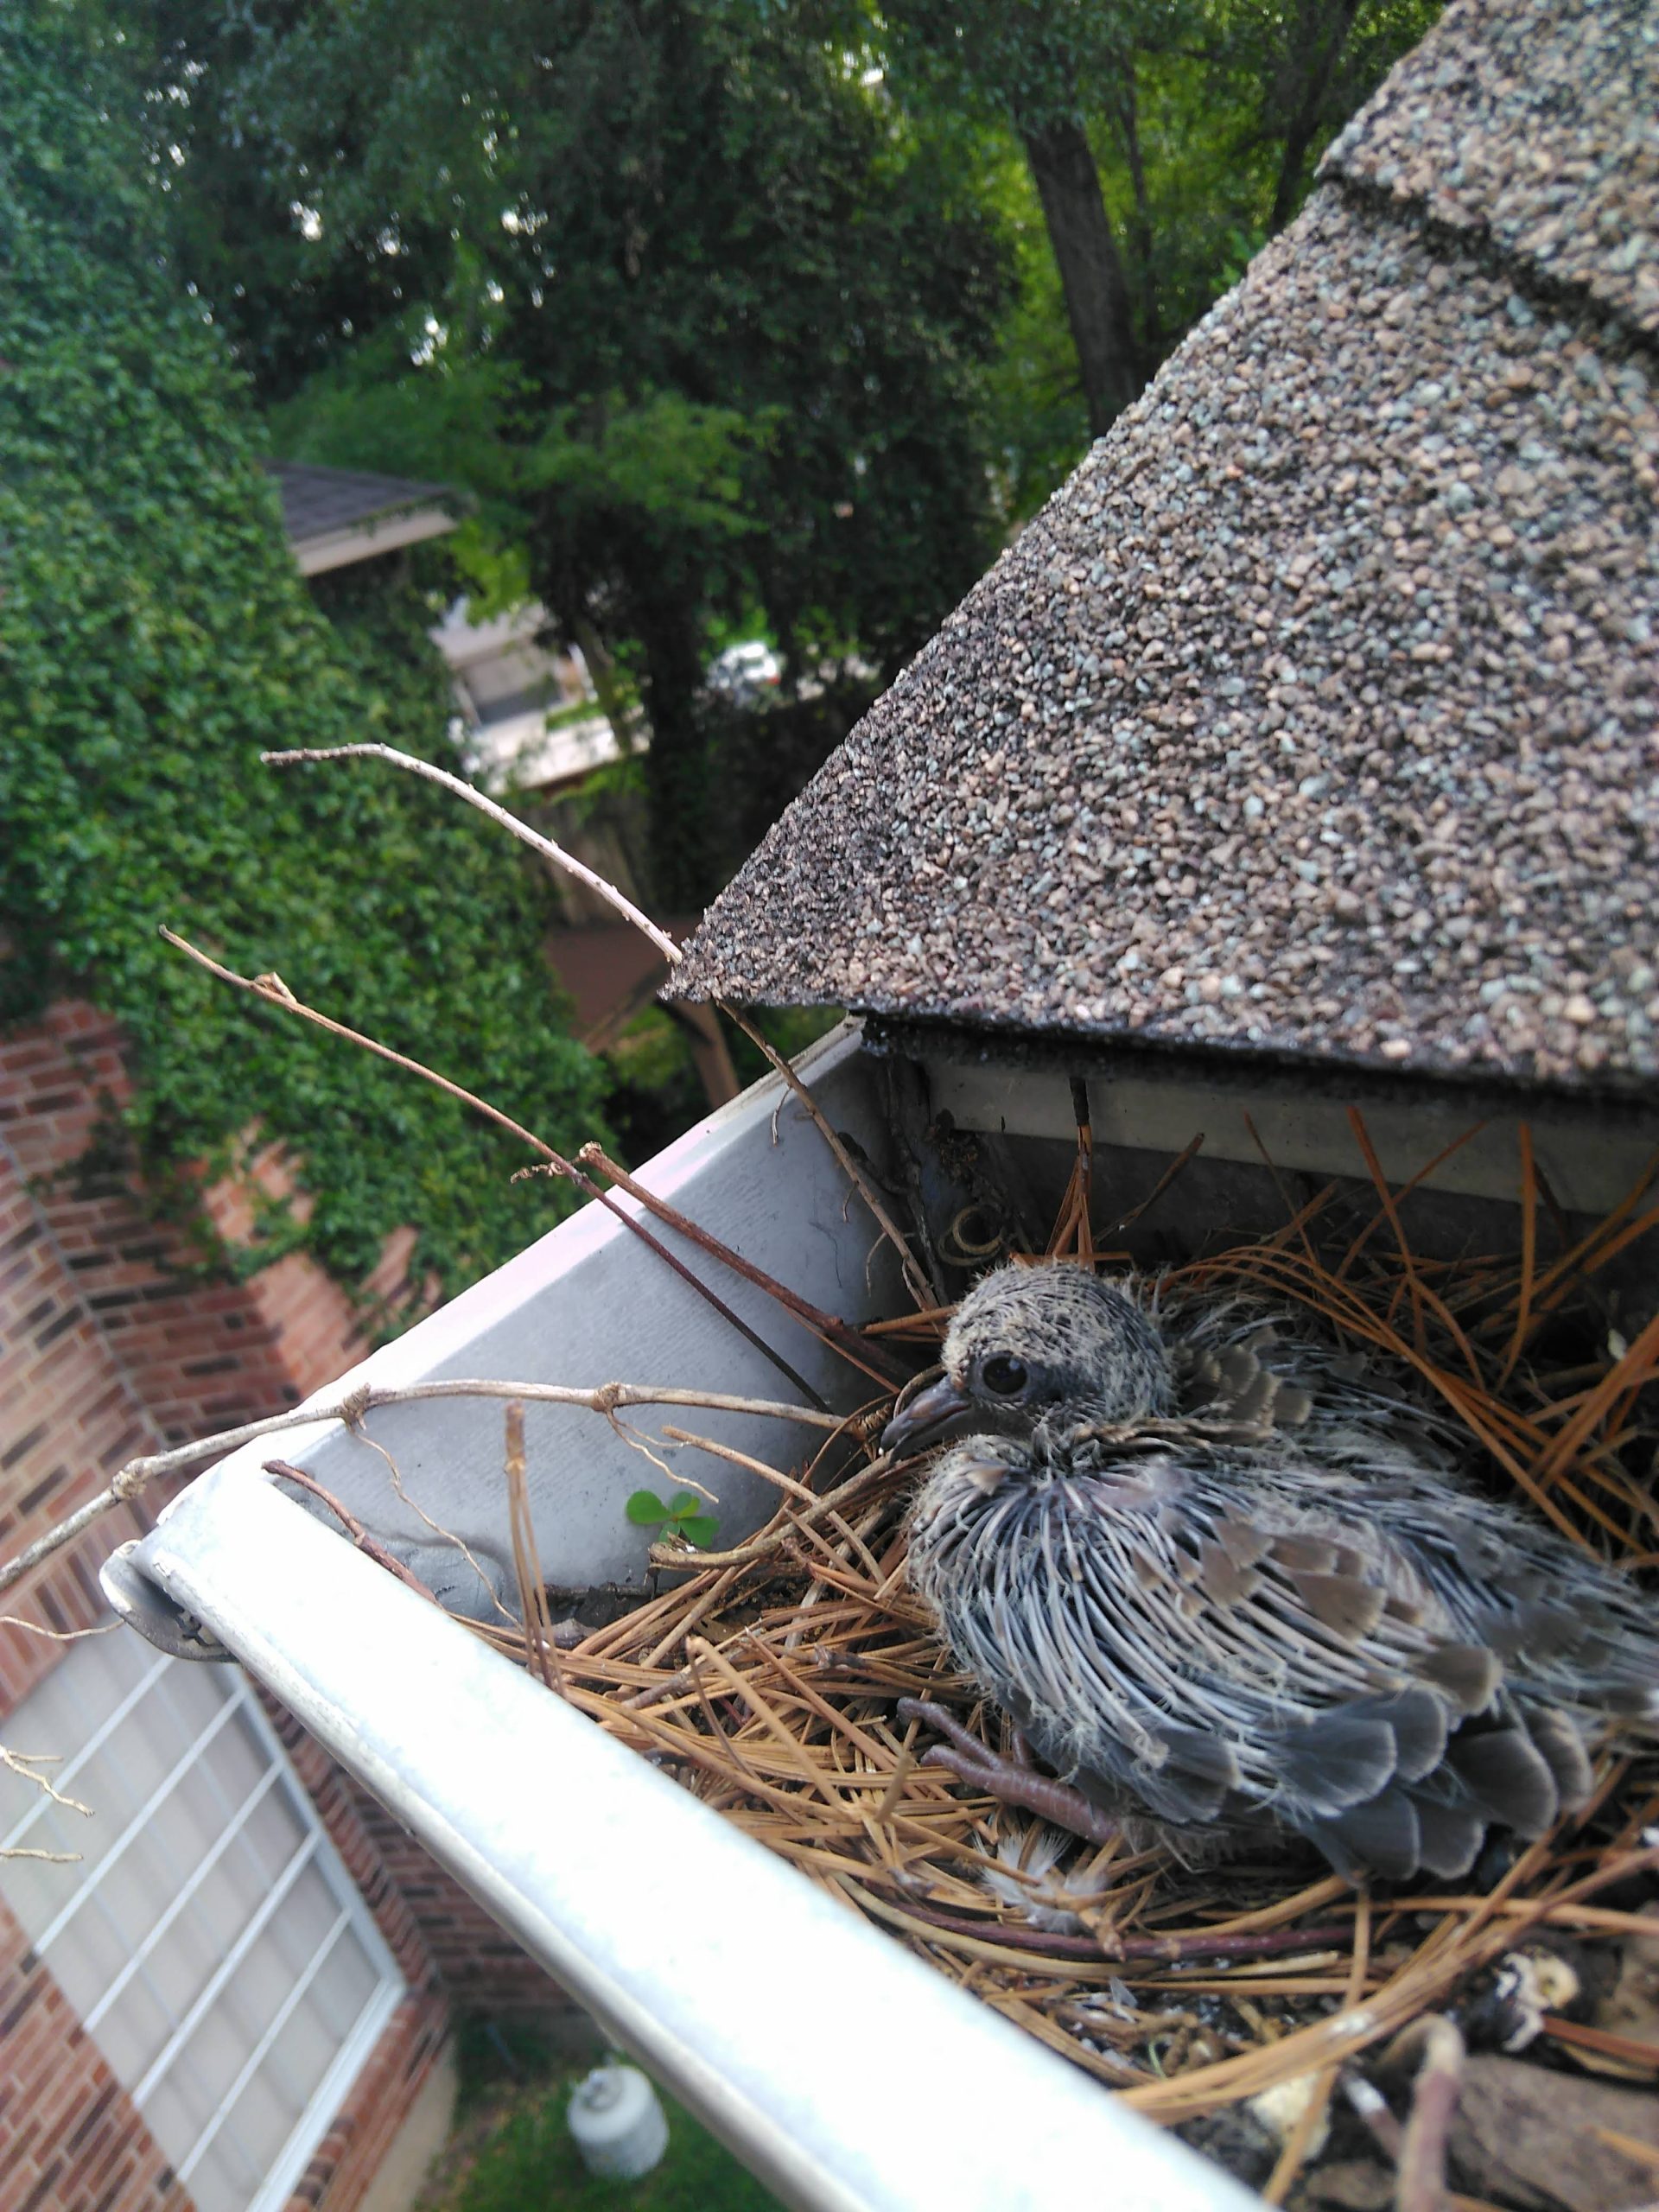 Get Birds Out of Your House - Call Critter Control for Bird Control